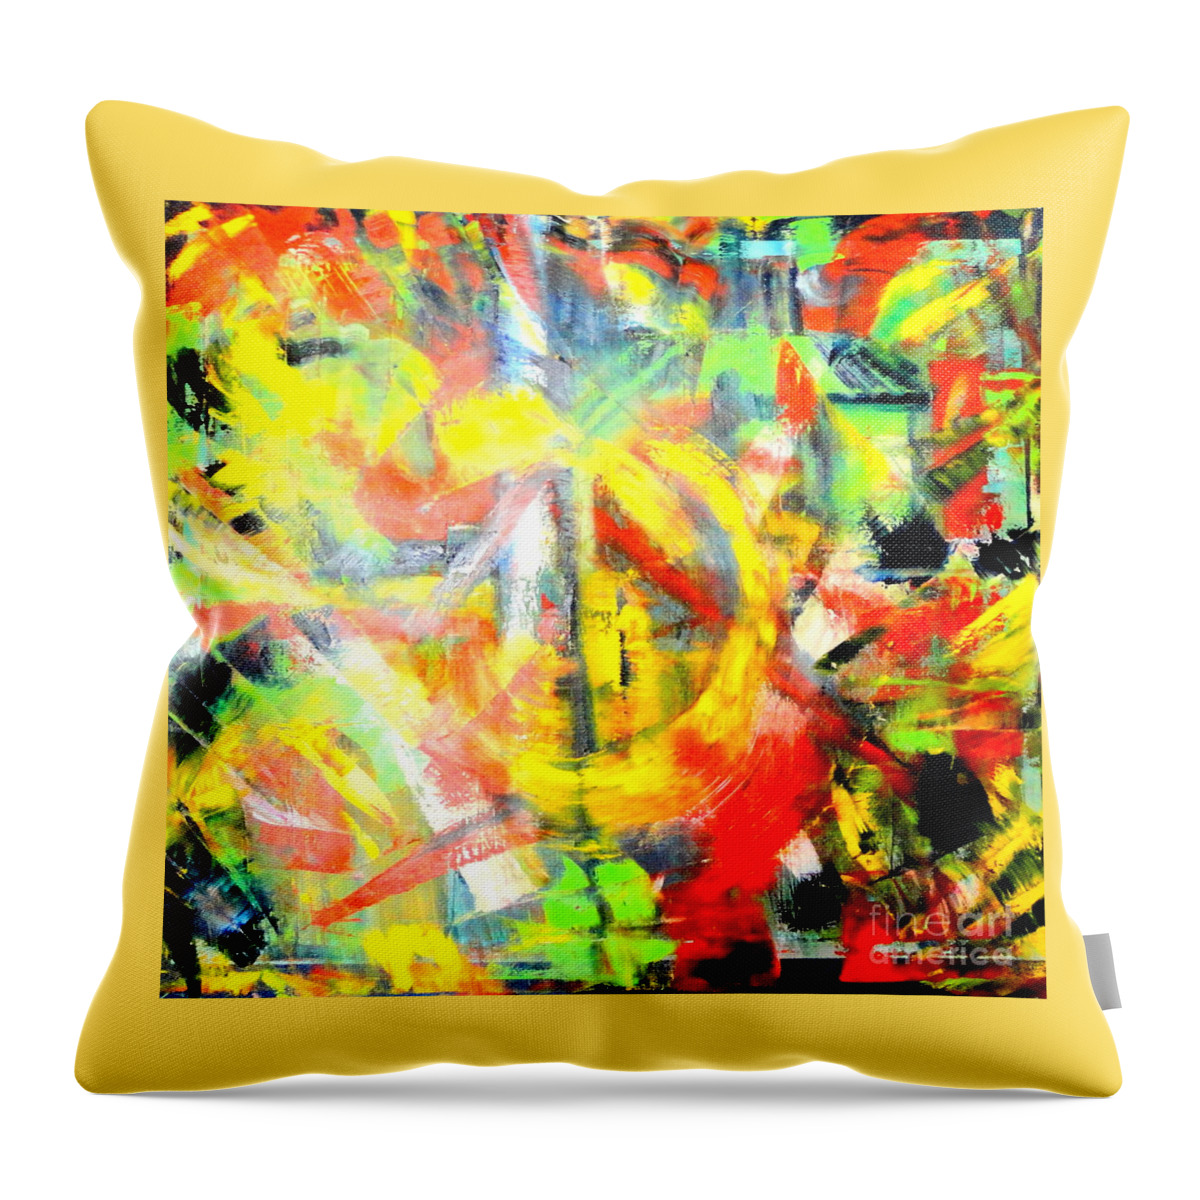 Out Of Order Throw Pillow featuring the painting Out Of Order by Dagmar Helbig